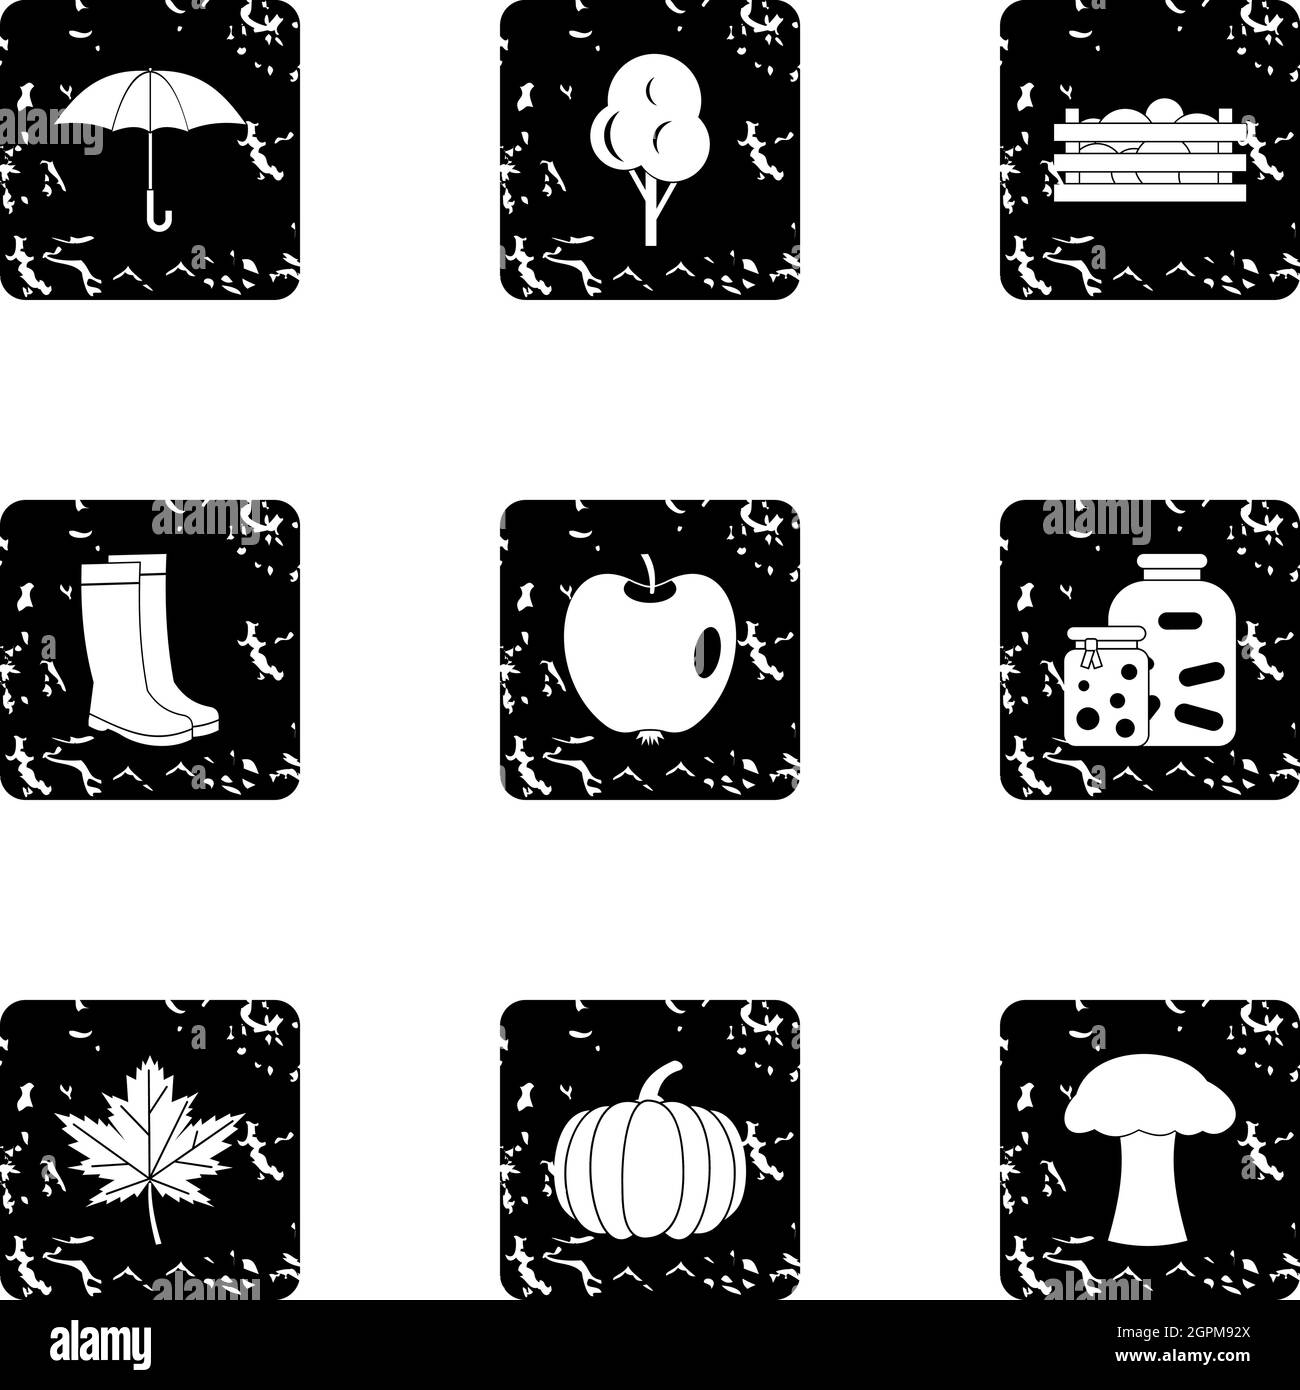 Autumn coming icons set, grunge style Stock Vector